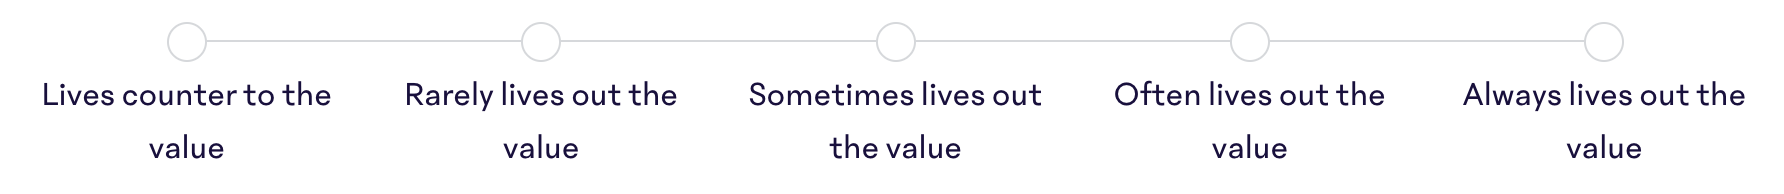 Company-Values-Default-Answer-Scale.png